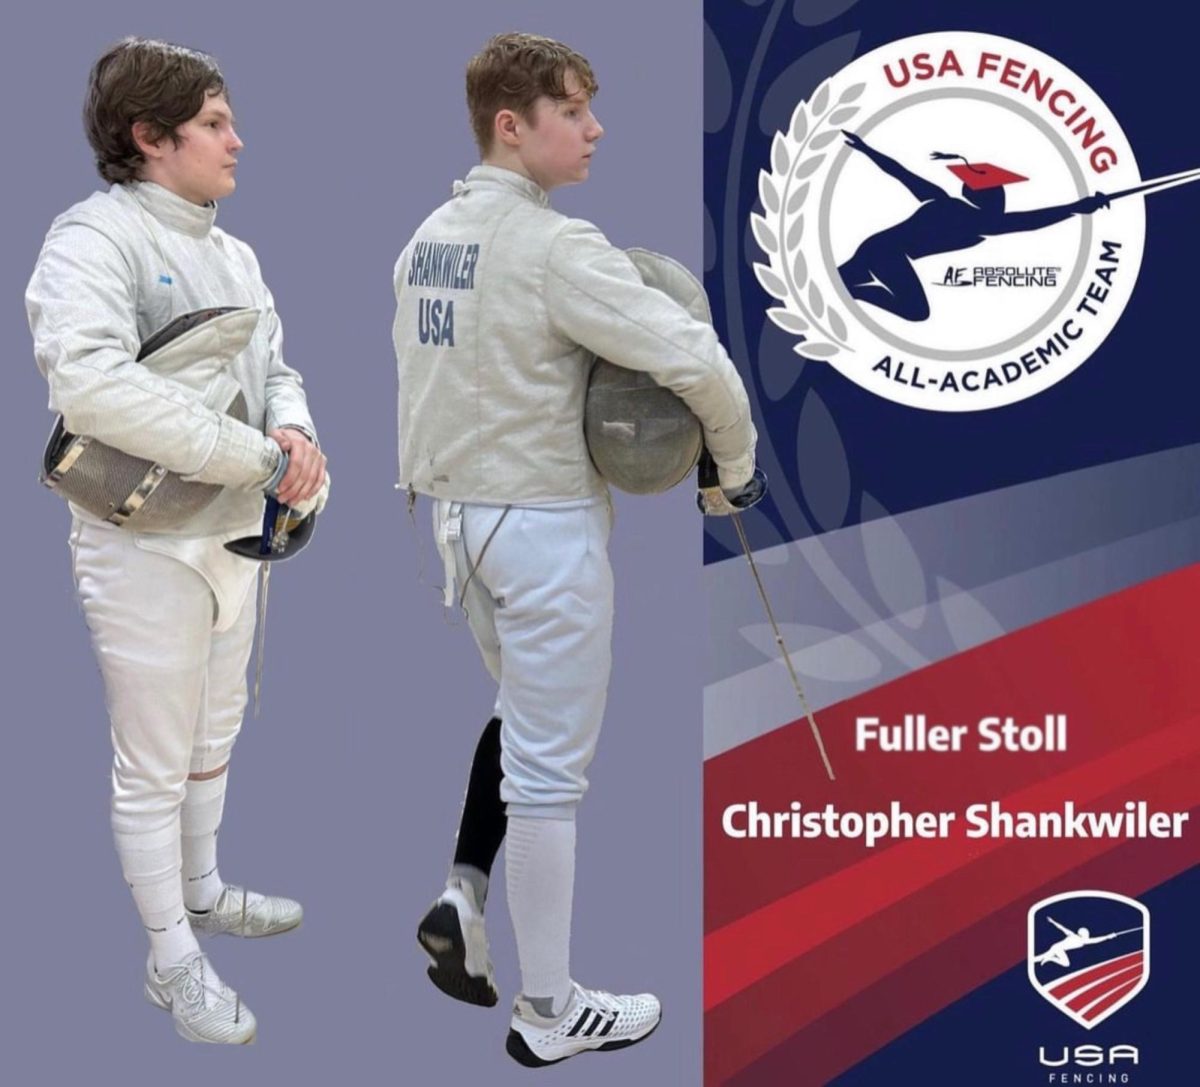 Saber+Fencers+Fuller+Stoll+and+Christopher+Shankwiler+awarded+the+USA+All+Academic+Fencing+awards+for+their+excellence+on+the+fencing+strip+and+on+their+report+cards.